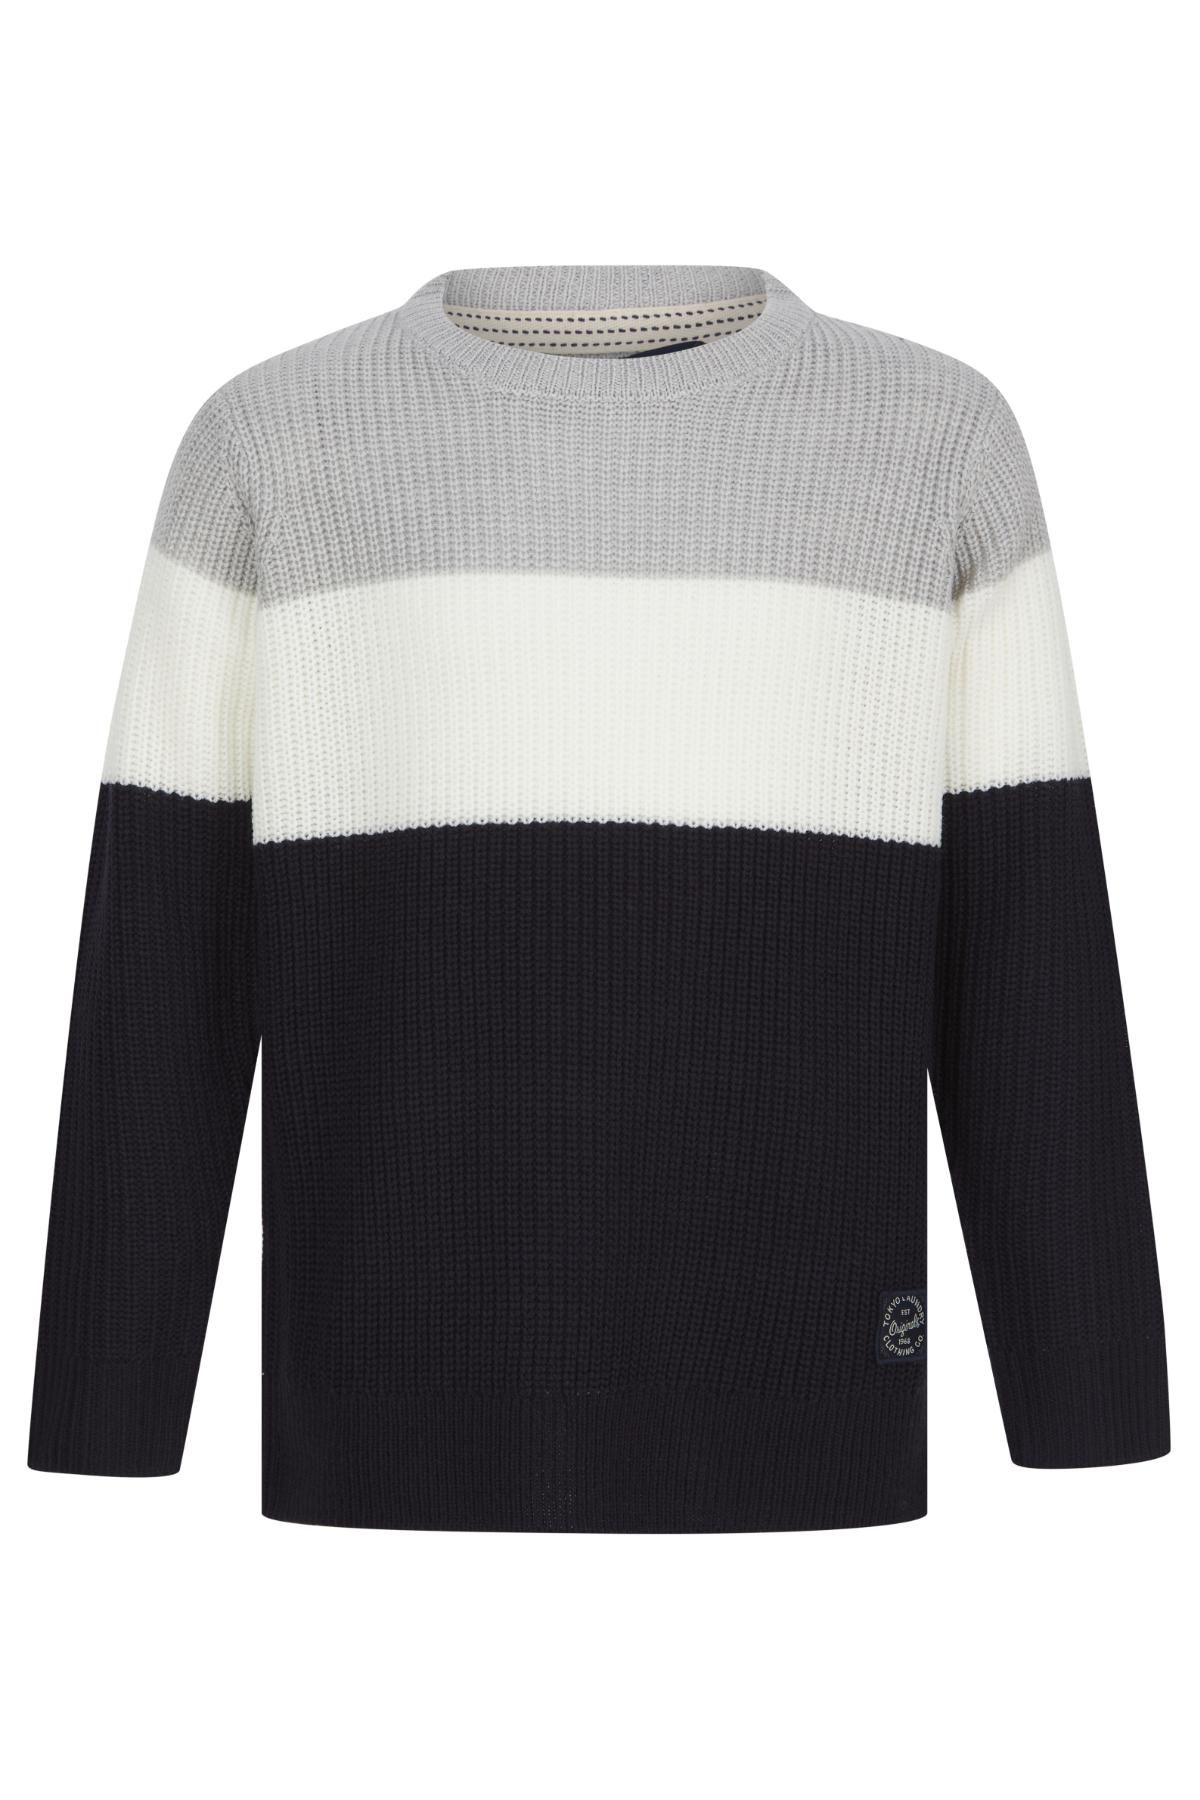 Toyko Laudry Boys Stiped Knitted Jumper Grey